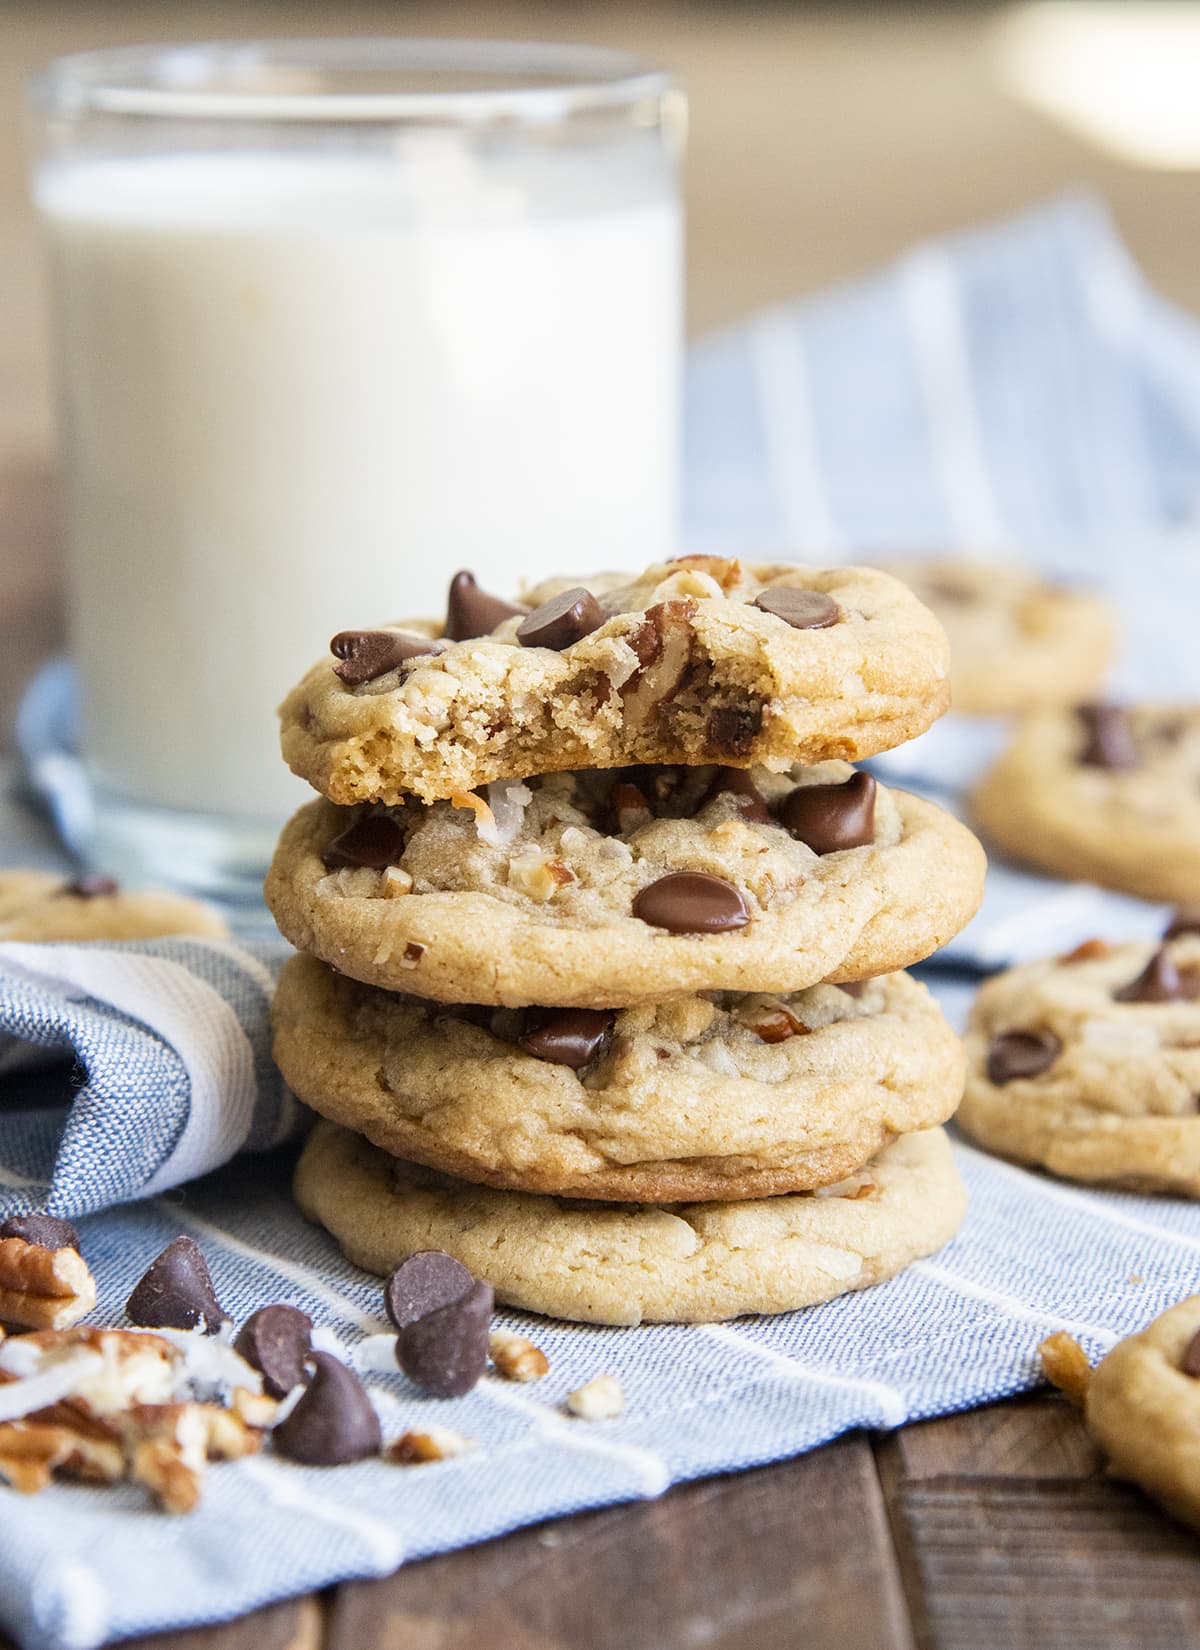 A stack of 4 drop style cookies with chocolate chips, pecans, and shredded coconut. The top cookie has a bite taken out of it.